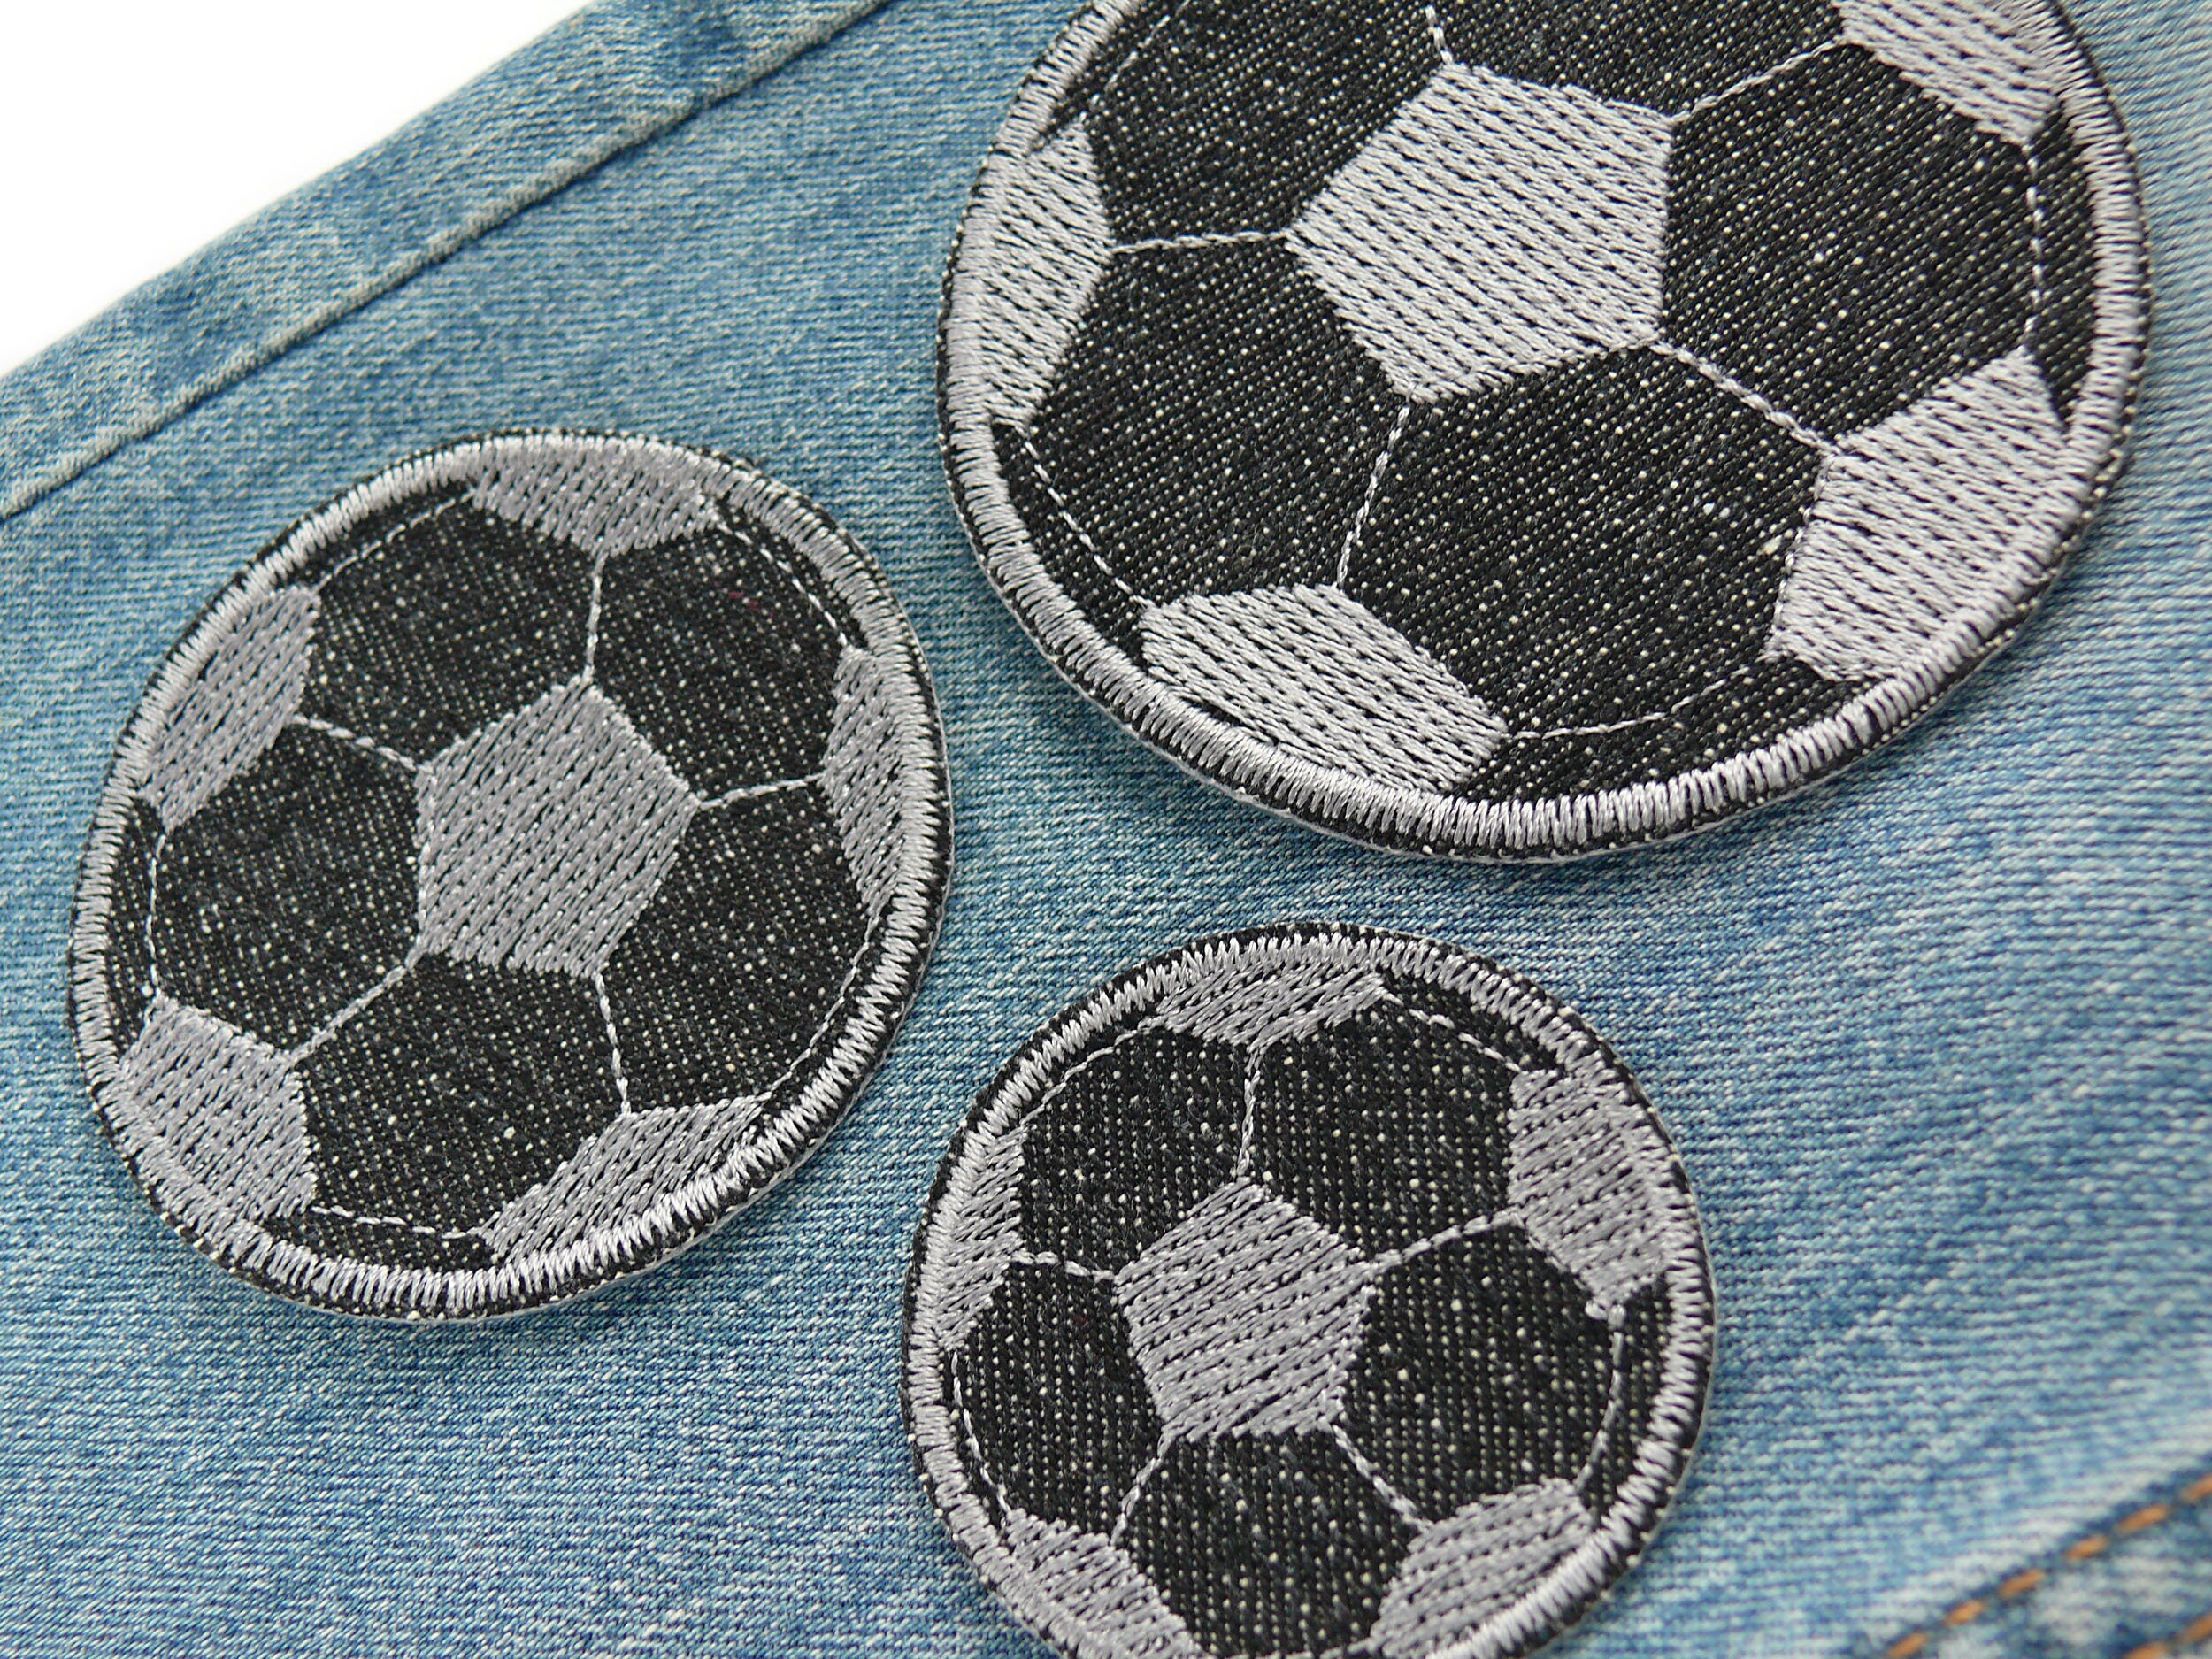 2 Football Iron on Patches, 5cm Soccer Ball Sew on Patch